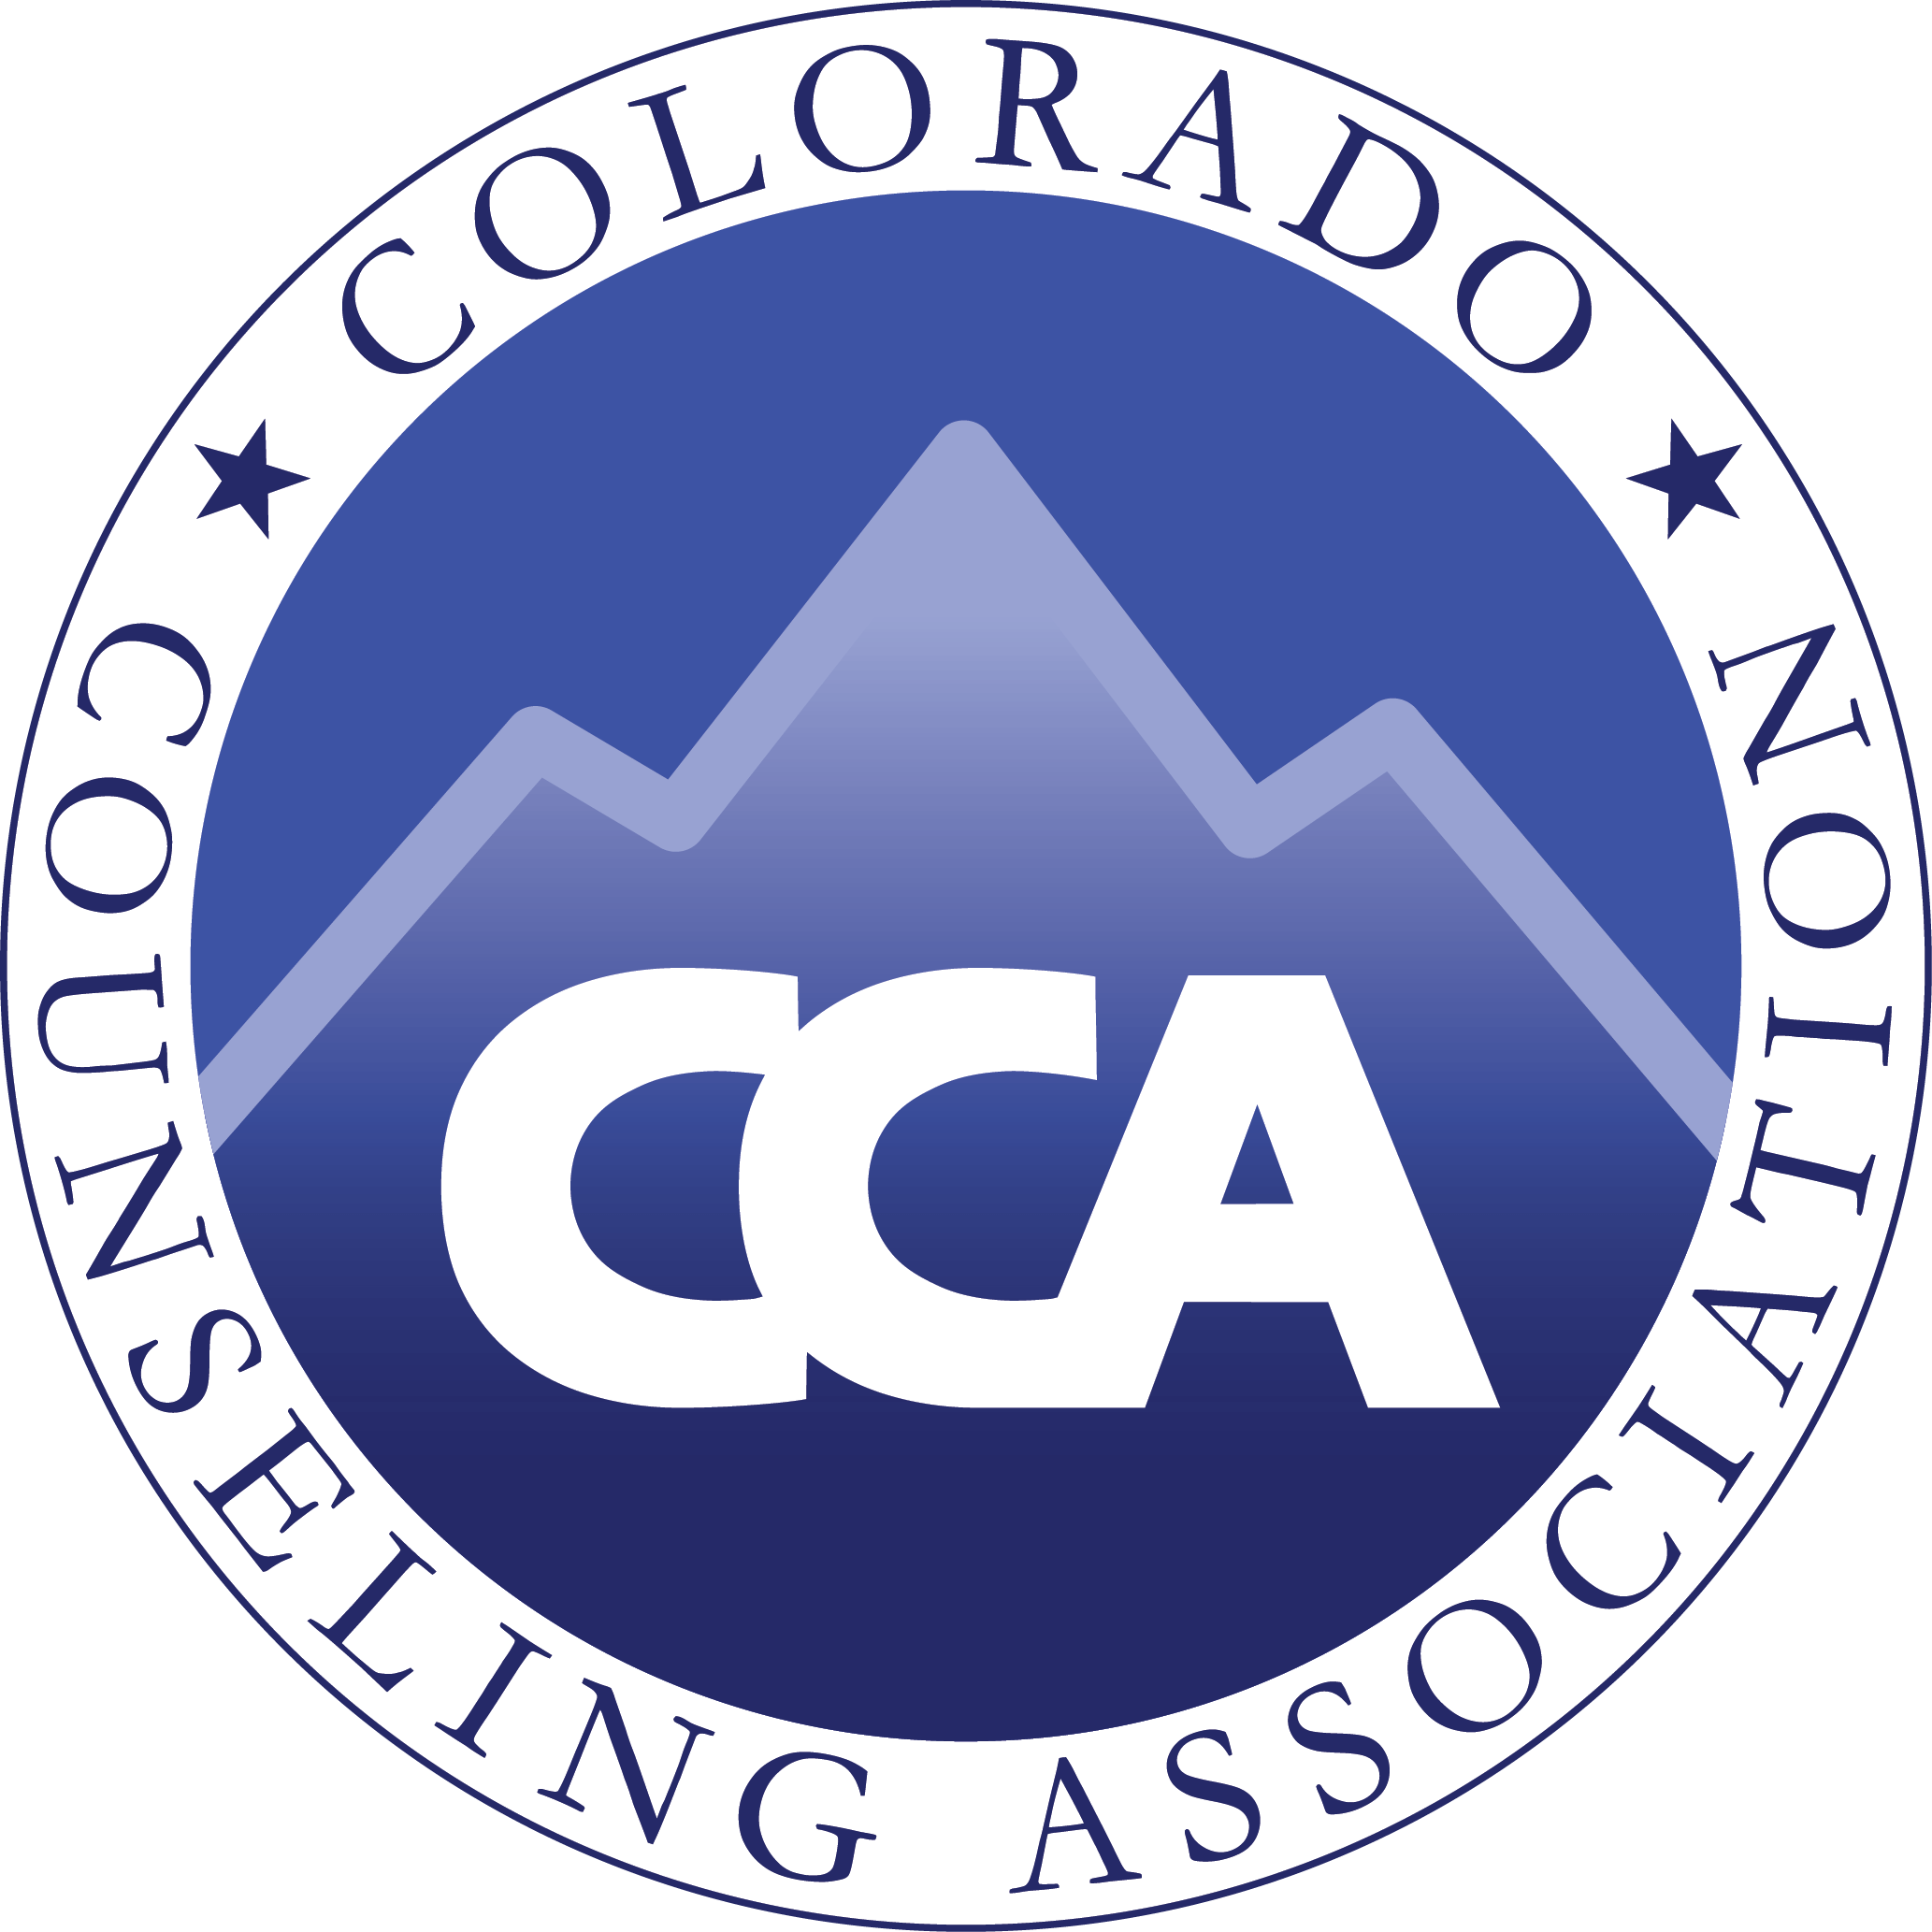 The image shows the logo for Colorado Counseling Association.